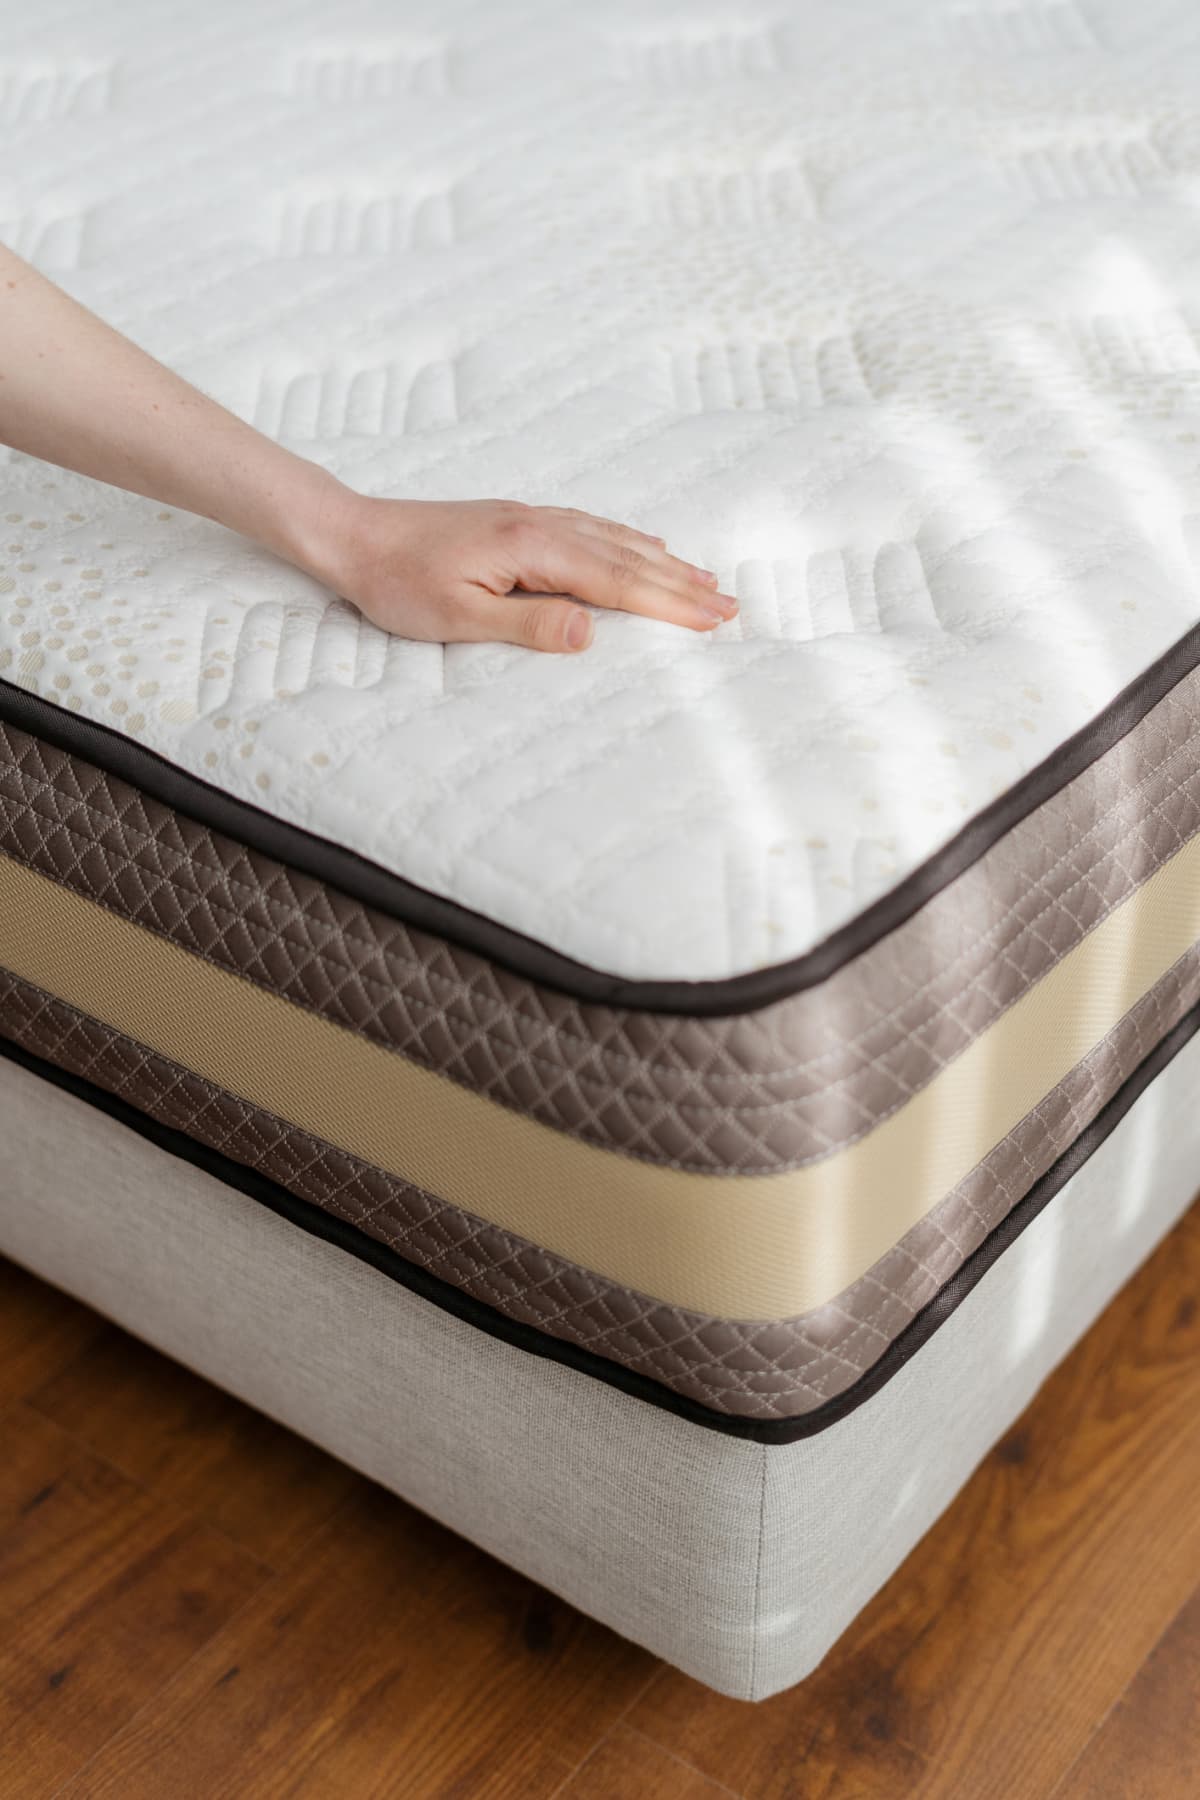 A person inspecting the mattress for its softness